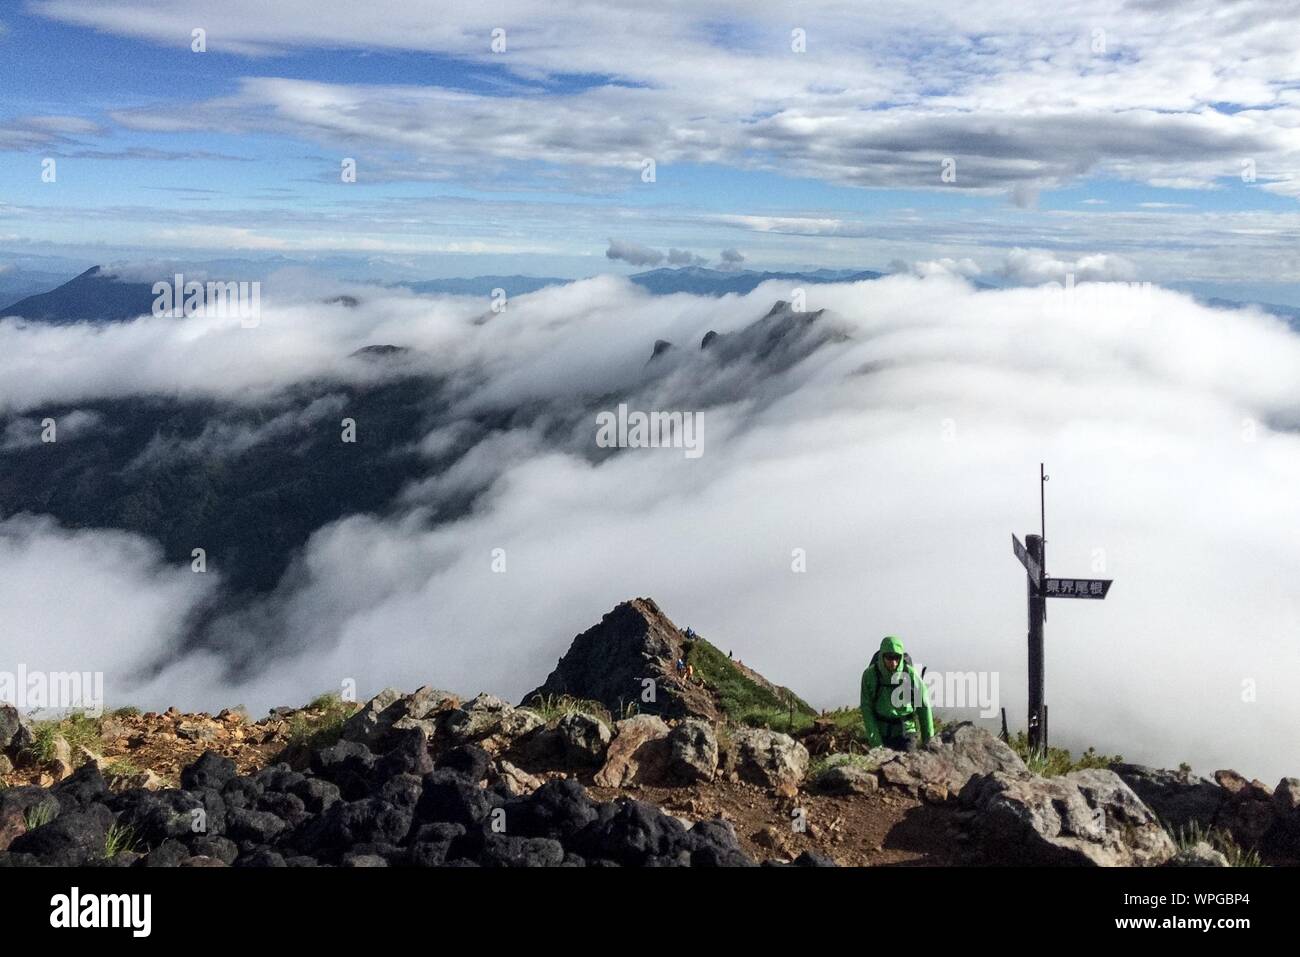 High Angle View Of Person Walking On Mount Aka Against Cloudy Sky Stock Photo